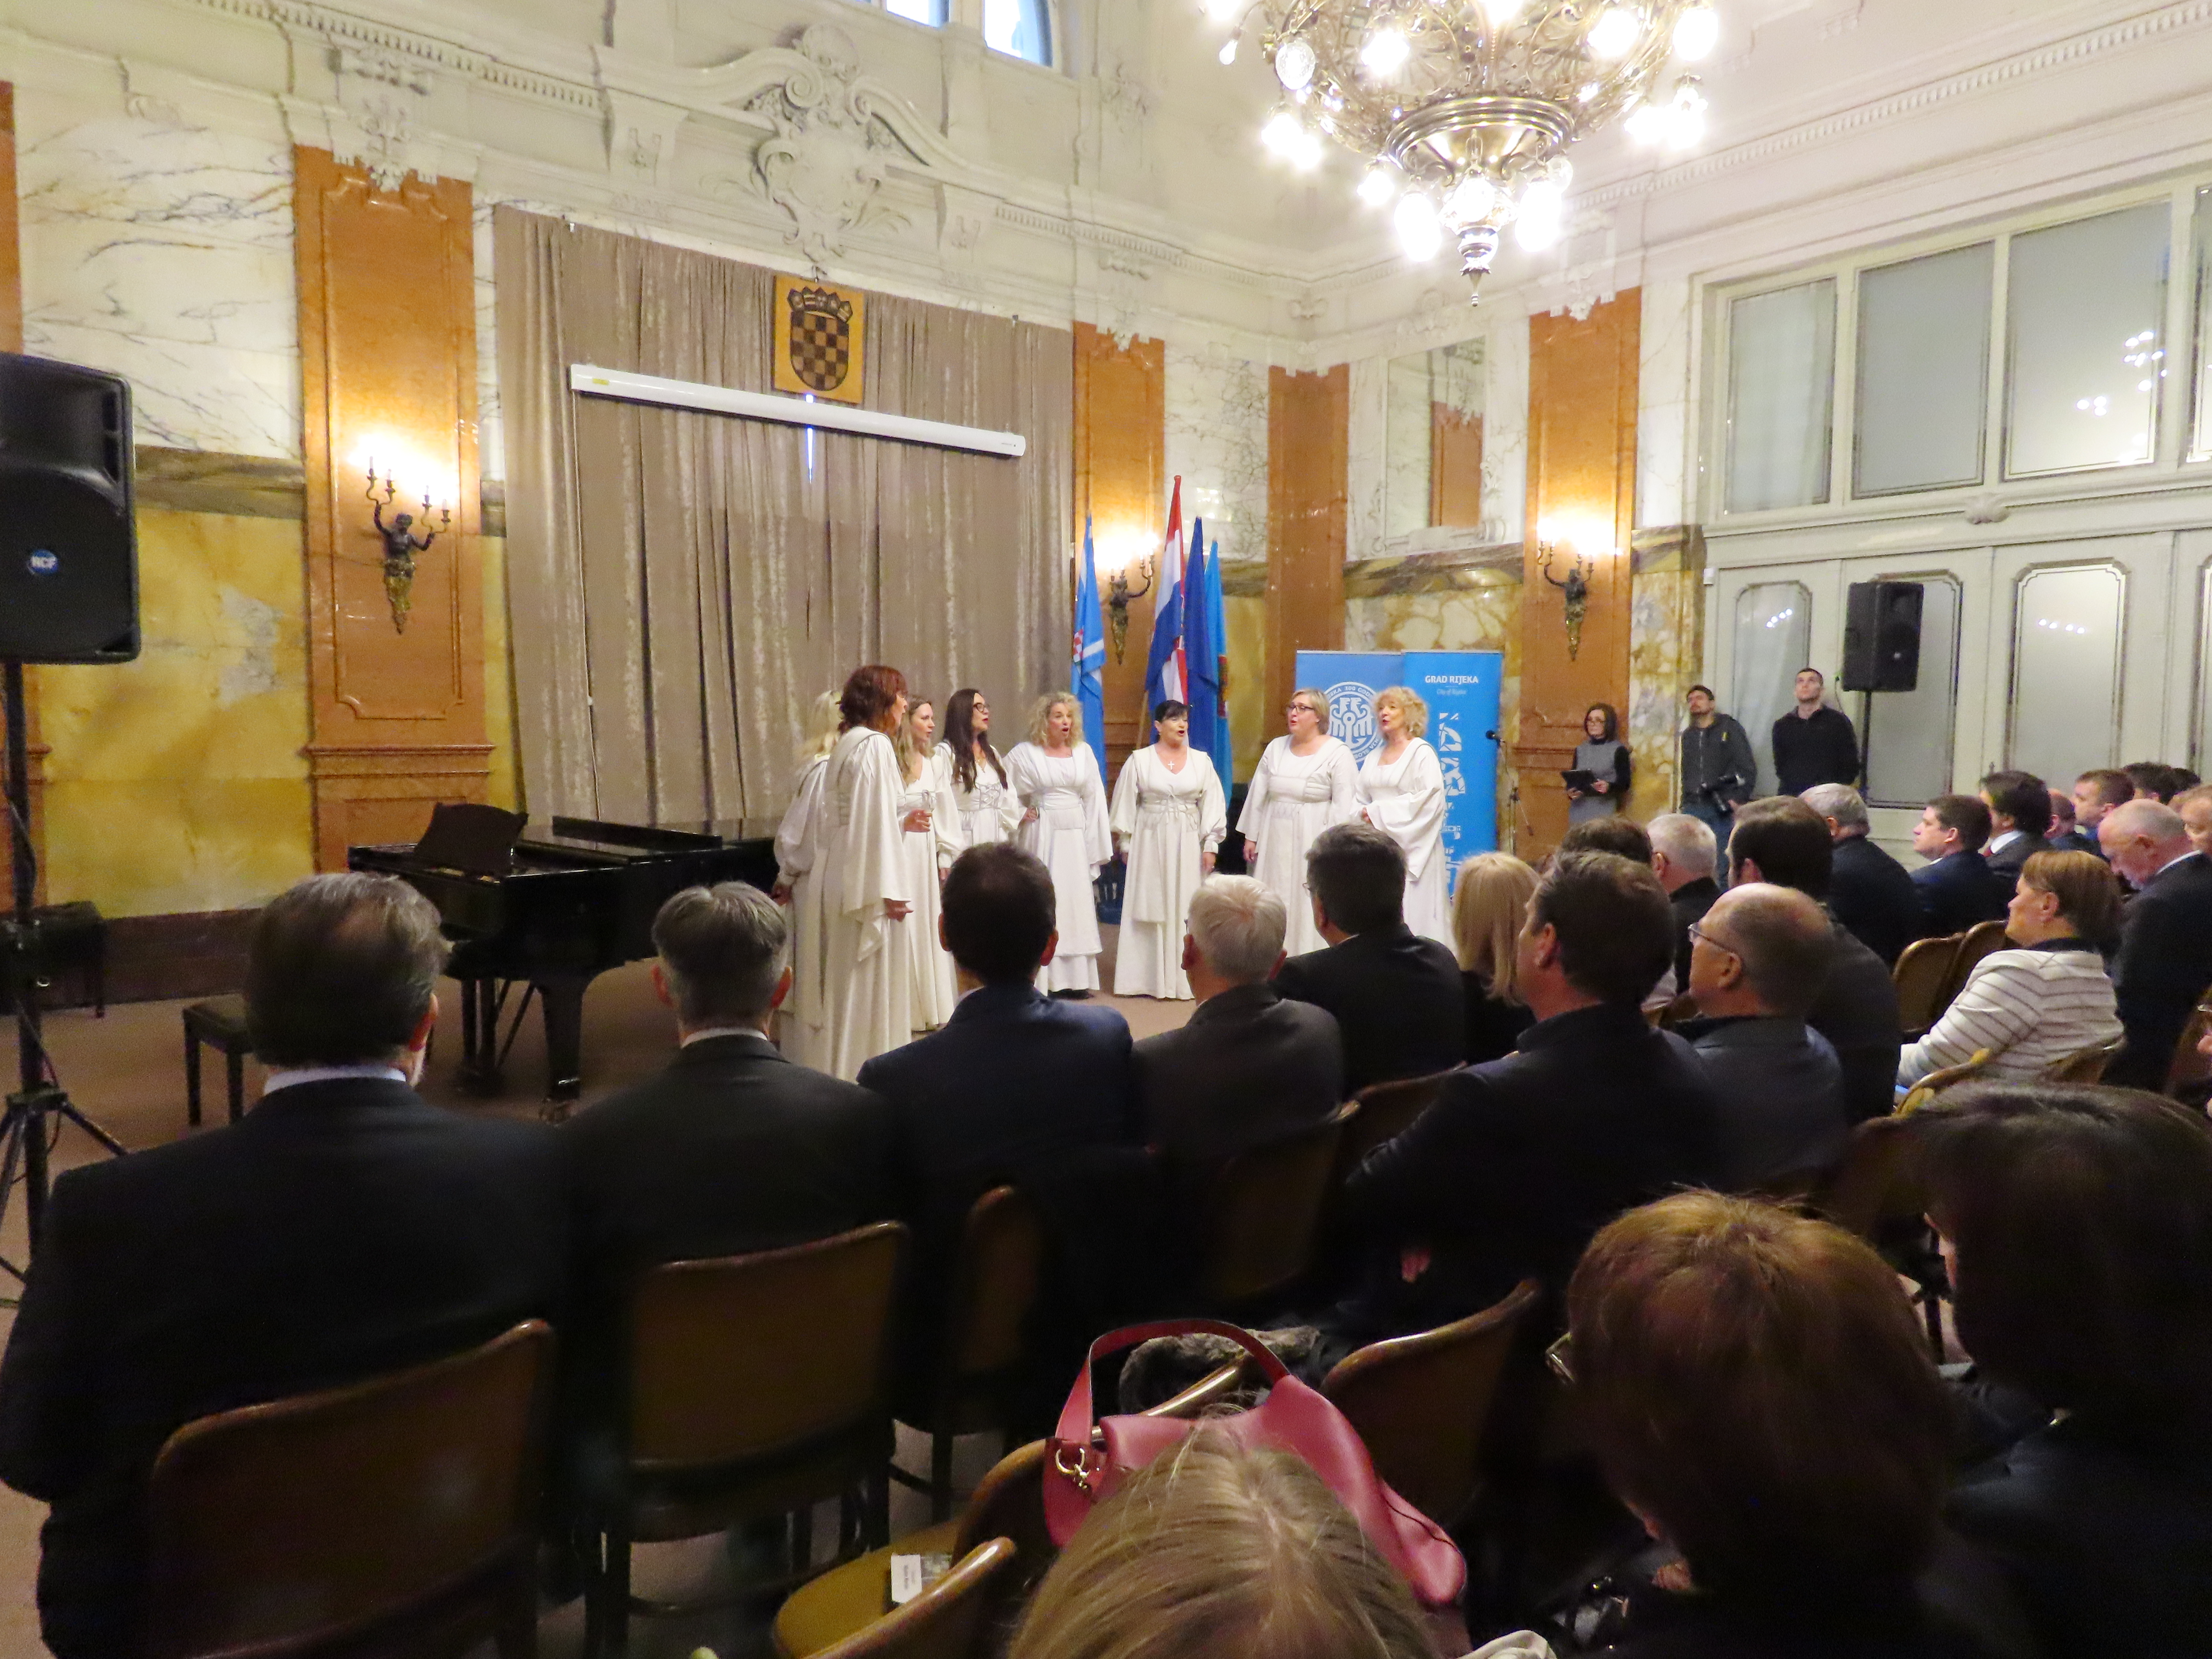 Ceremonial academy held on the occasion of the 300th anniversary of the proclamation of Rijeka as Free Royal Port